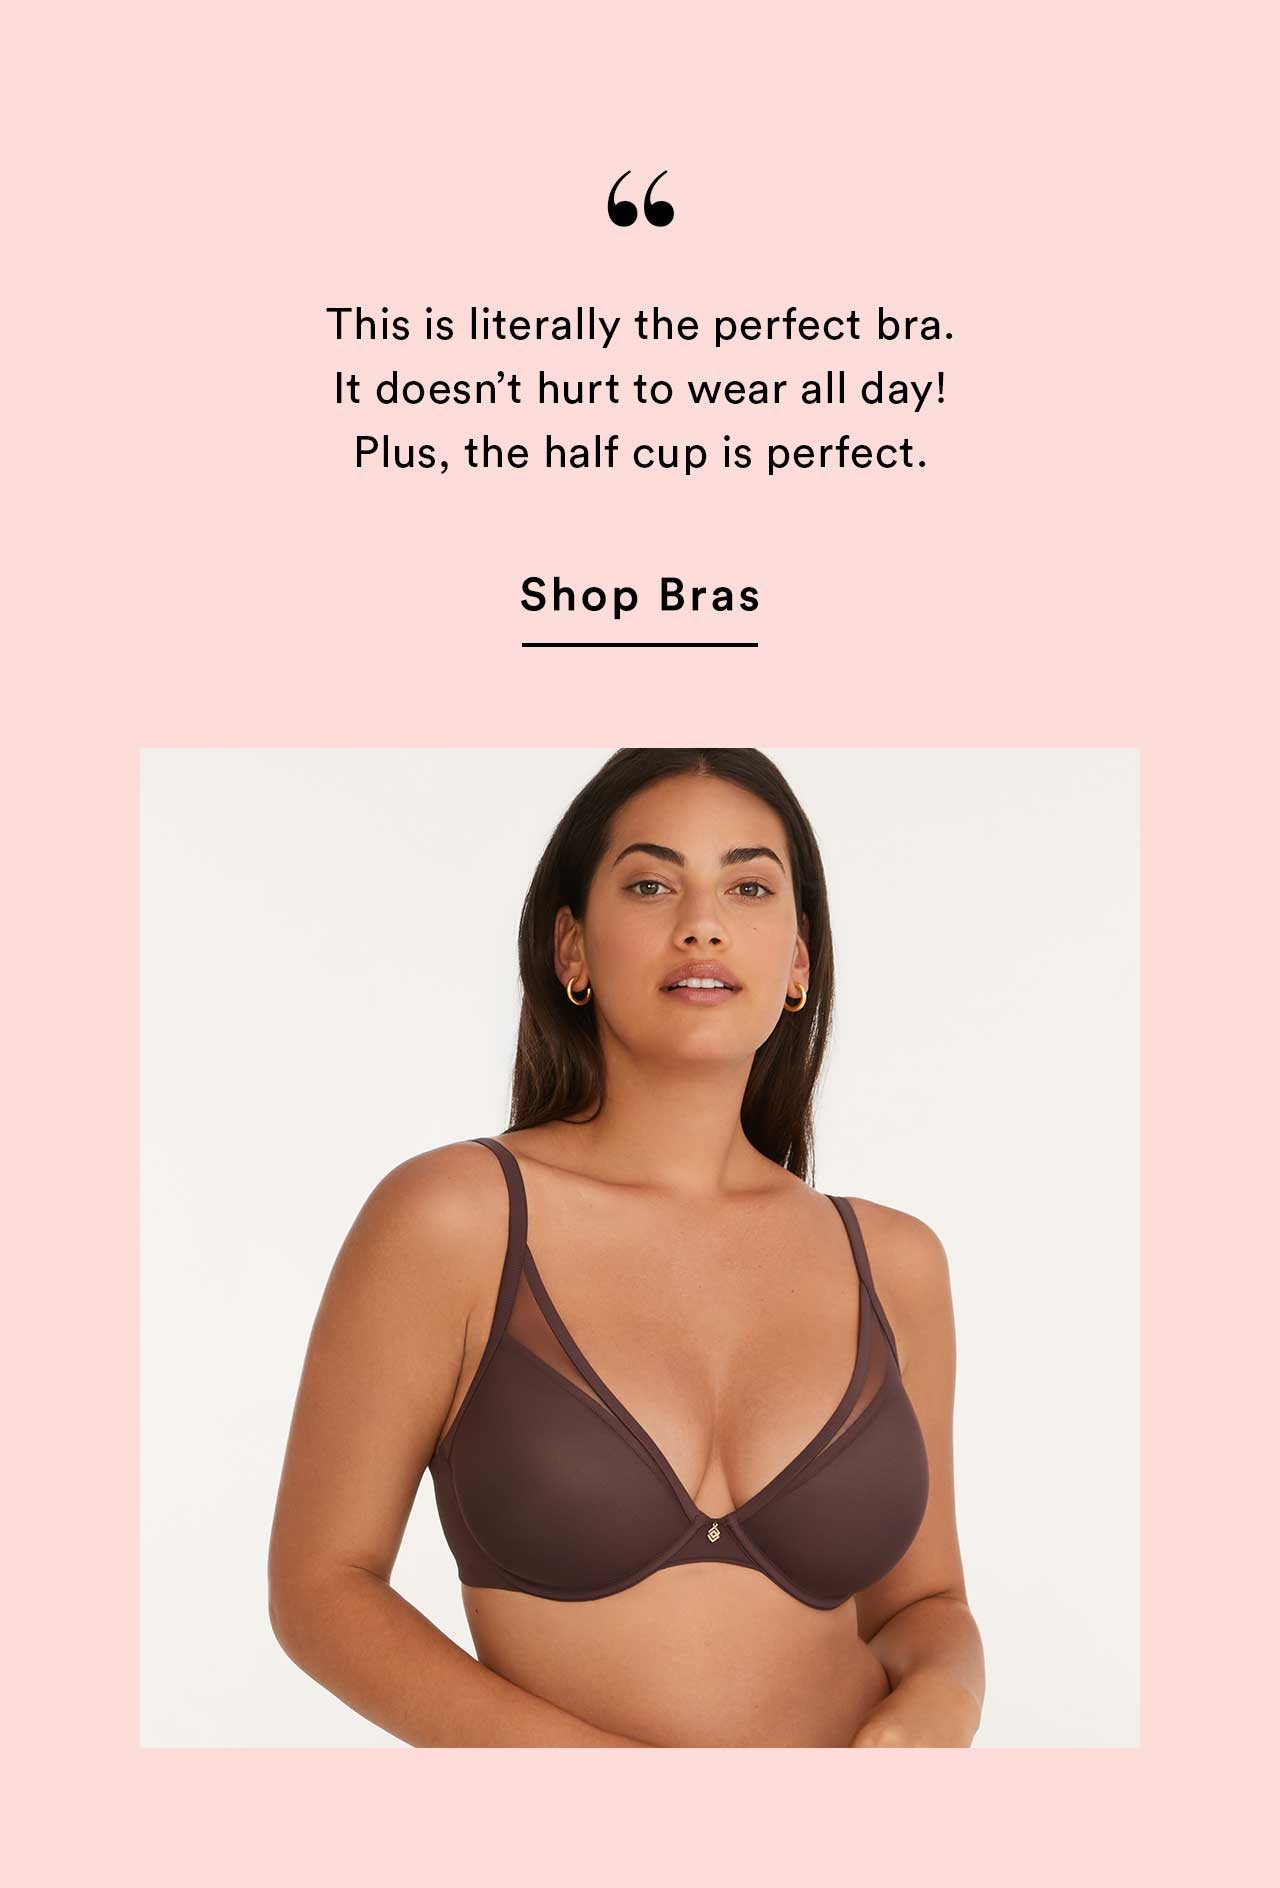 ”This is literally the perfect bra. It doesn’t hurt to wear all day! Plus, the half cup is perfect.” | Shop Bras